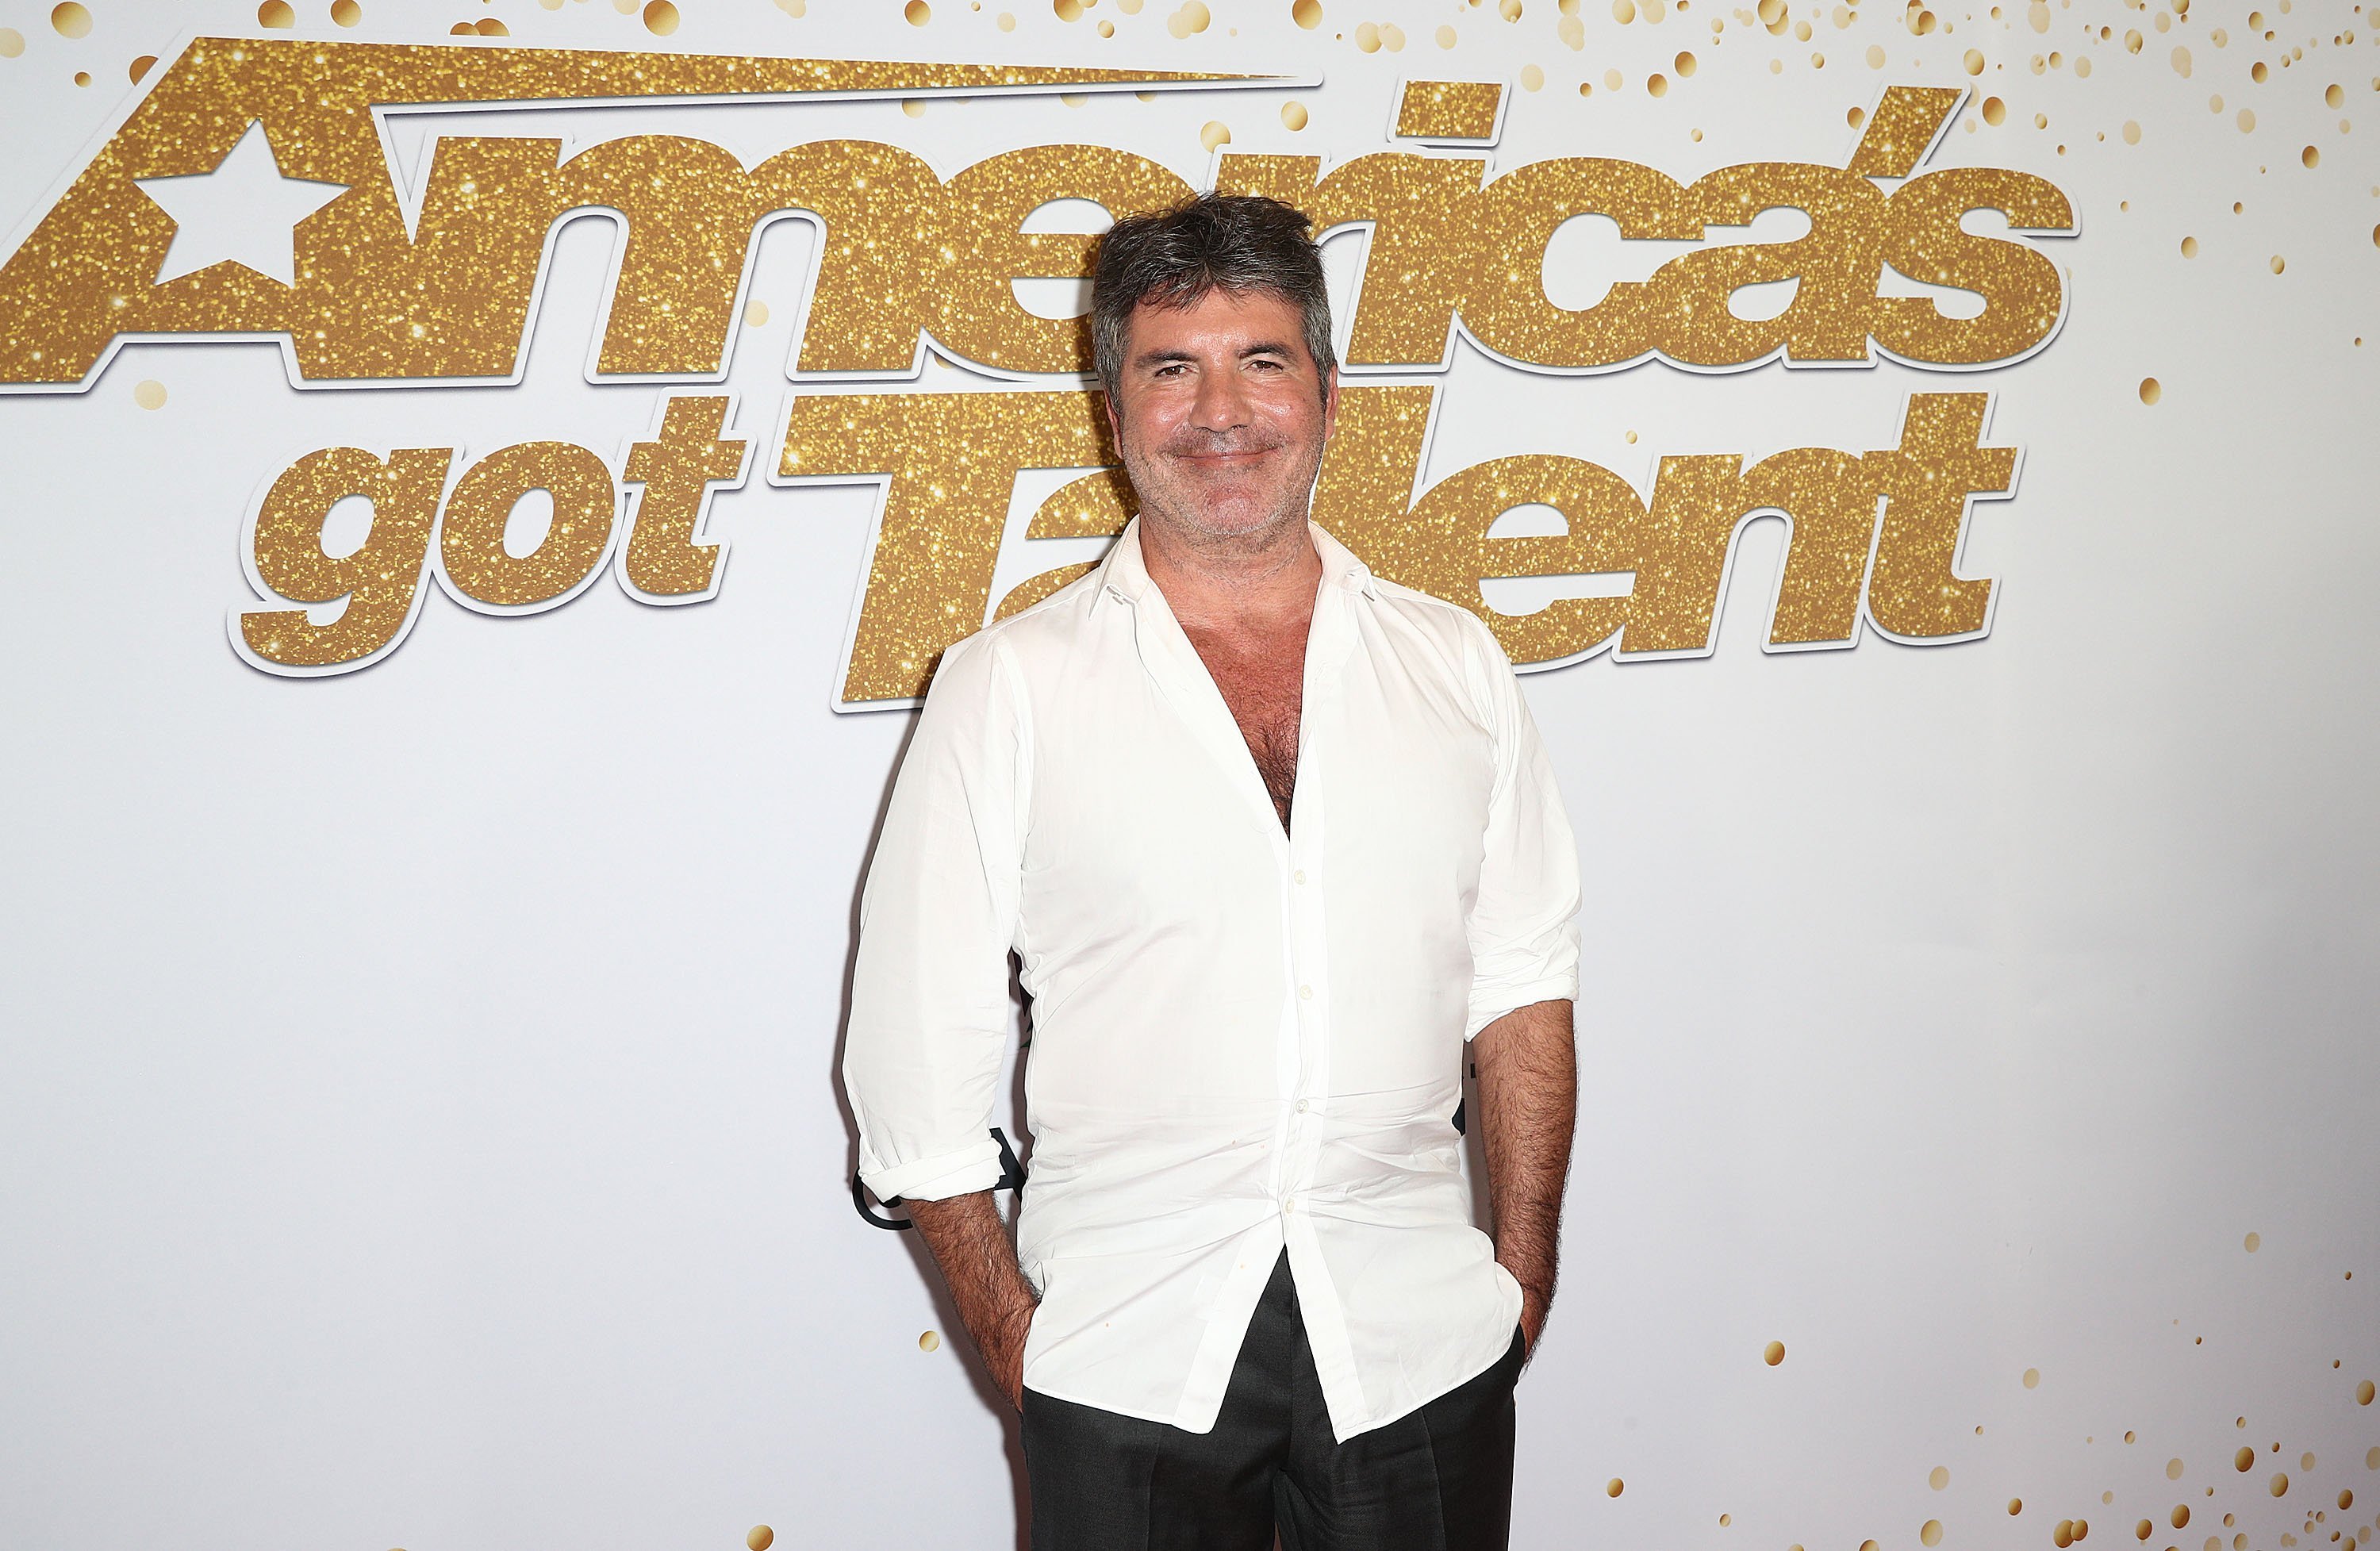 Simon Cowell at an "America's Got Talent" event | Photo: Getty Images